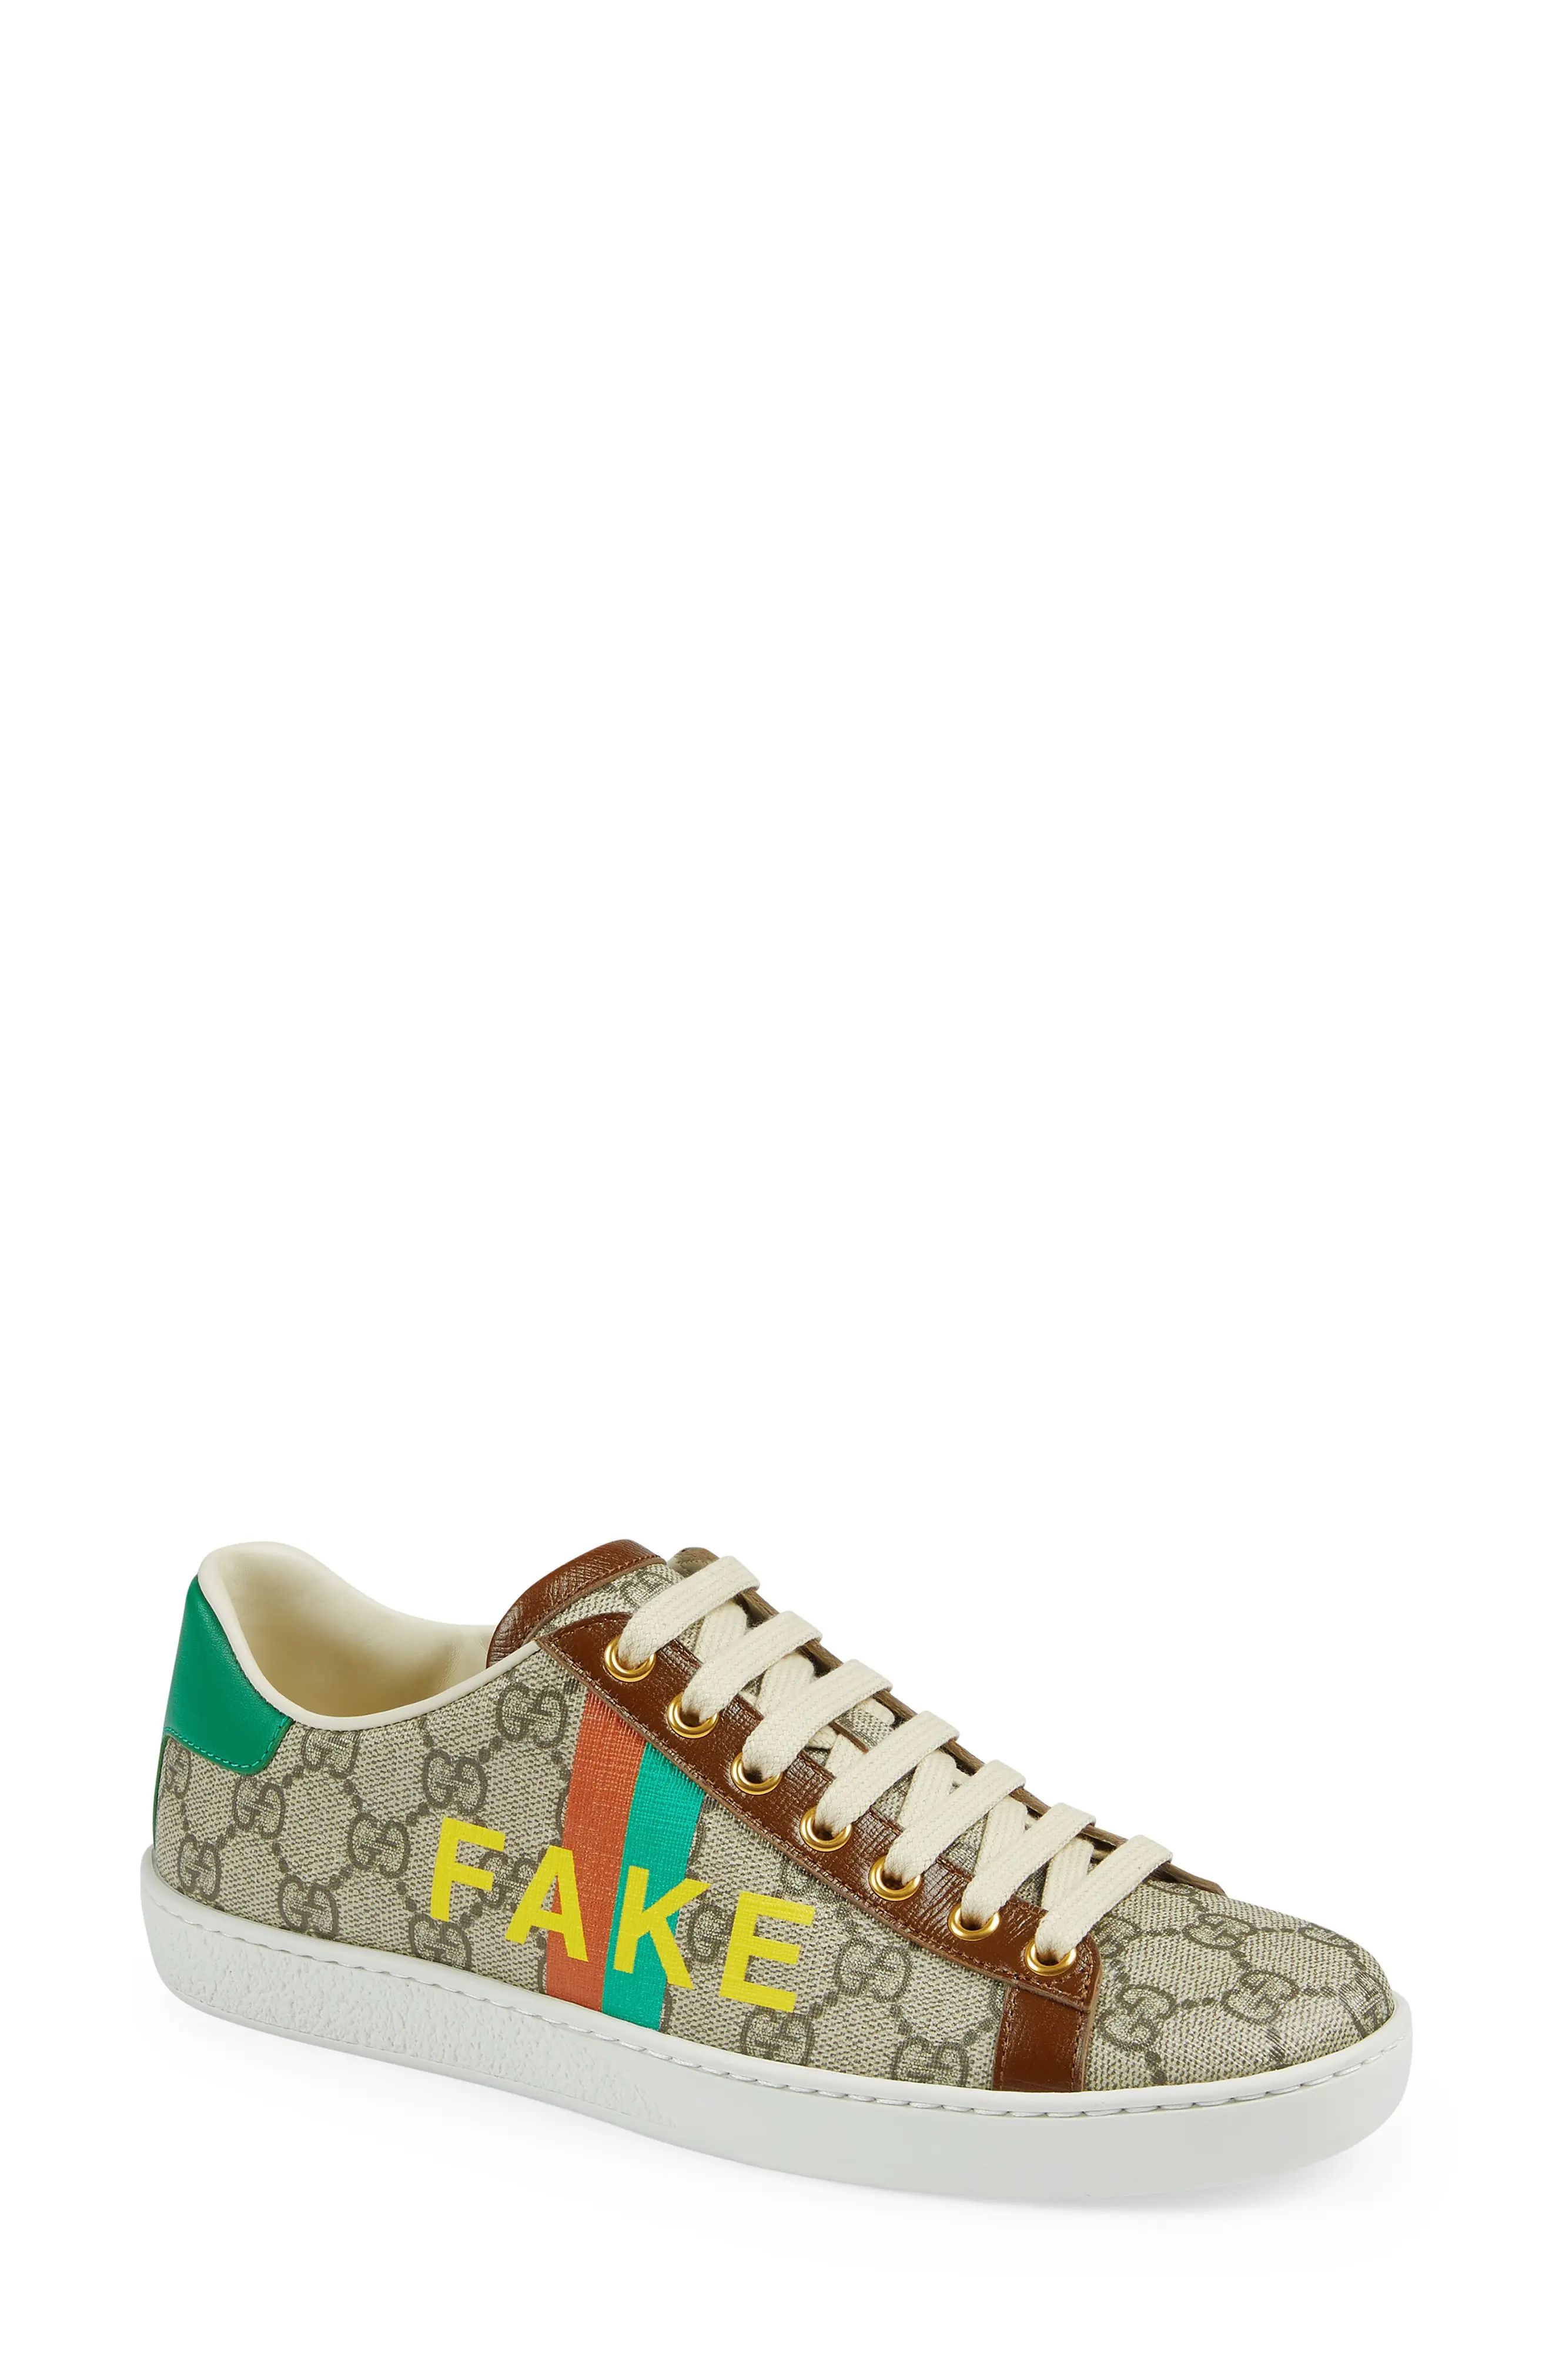 Women's Gucci Ace Fake/not Gg Supreme Sneaker, Size 9US - Brown | Nordstrom